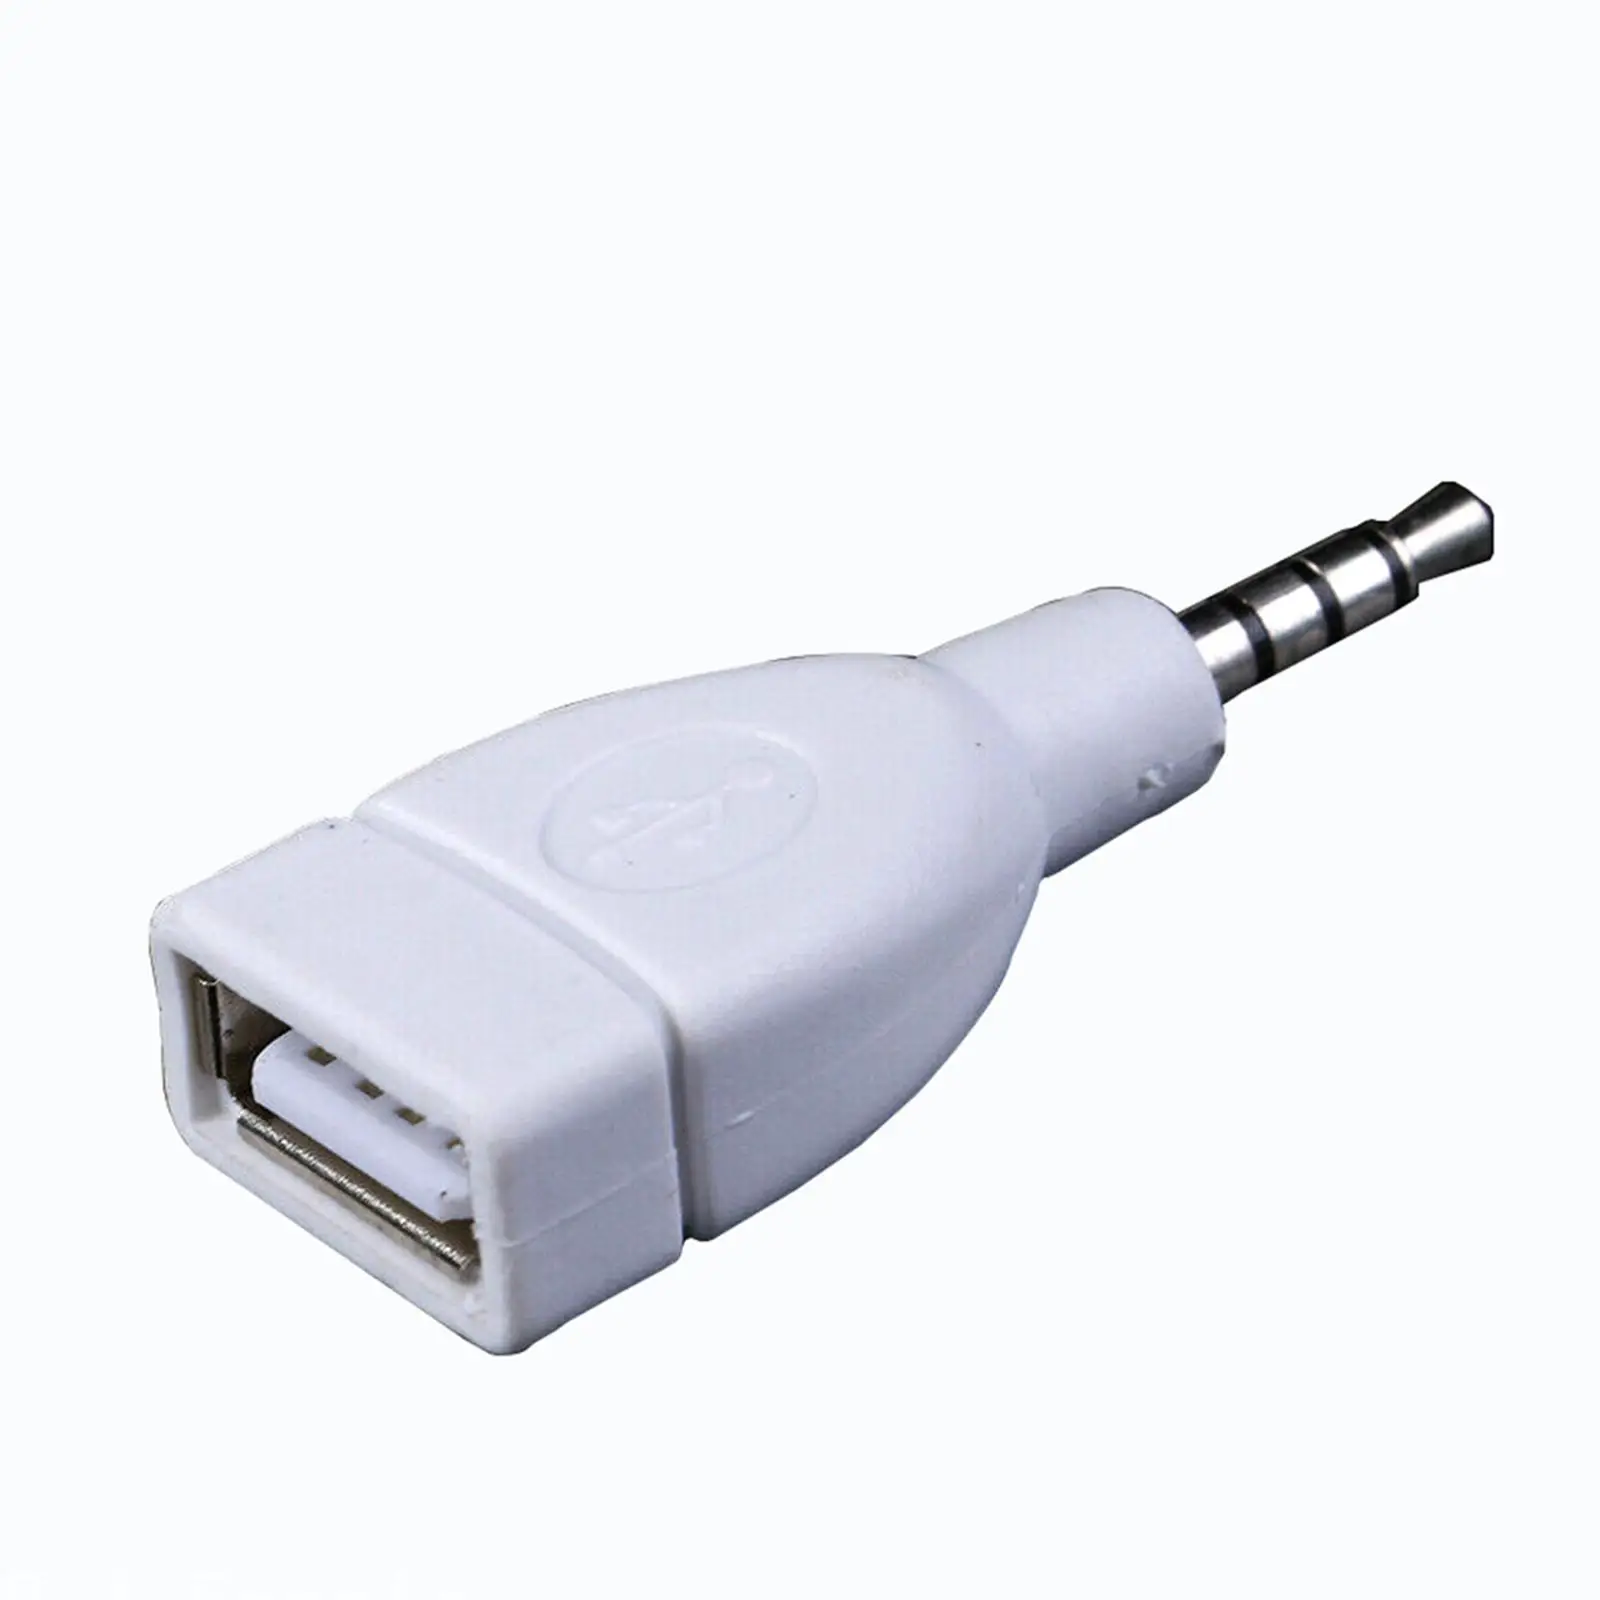 Auto 3.5mm Male AUX to USB 2.0 Adapter Plug AUX Audio Input MP3 from Disk Car Auxiliary Port Audio 